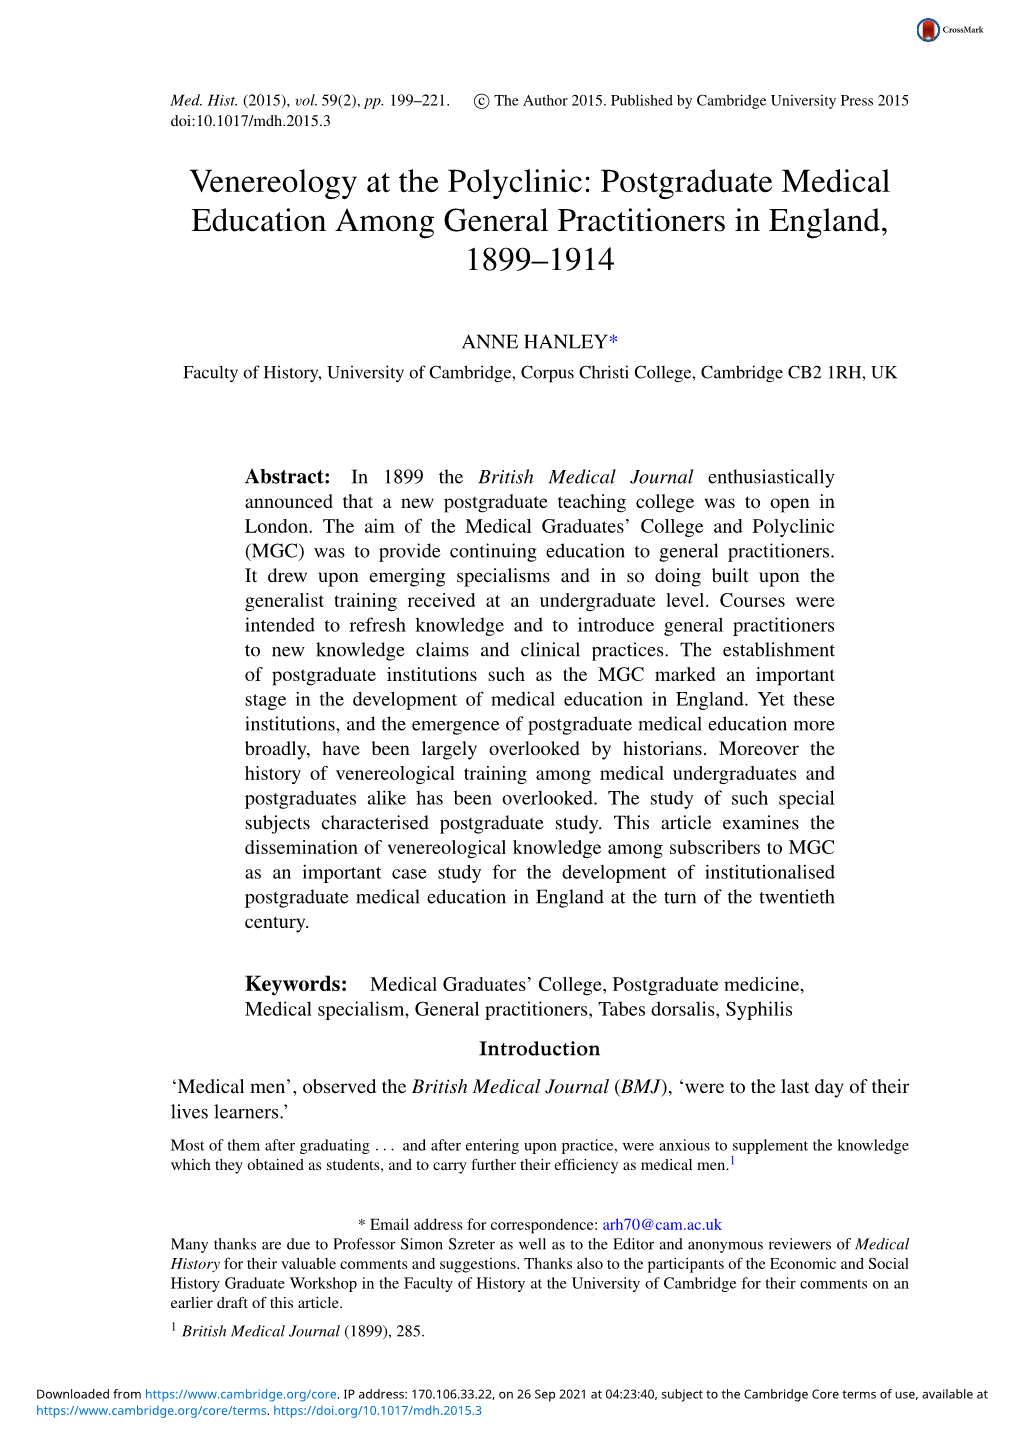 Venereology at the Polyclinic: Postgraduate Medical Education Among General Practitioners in England, 1899–1914